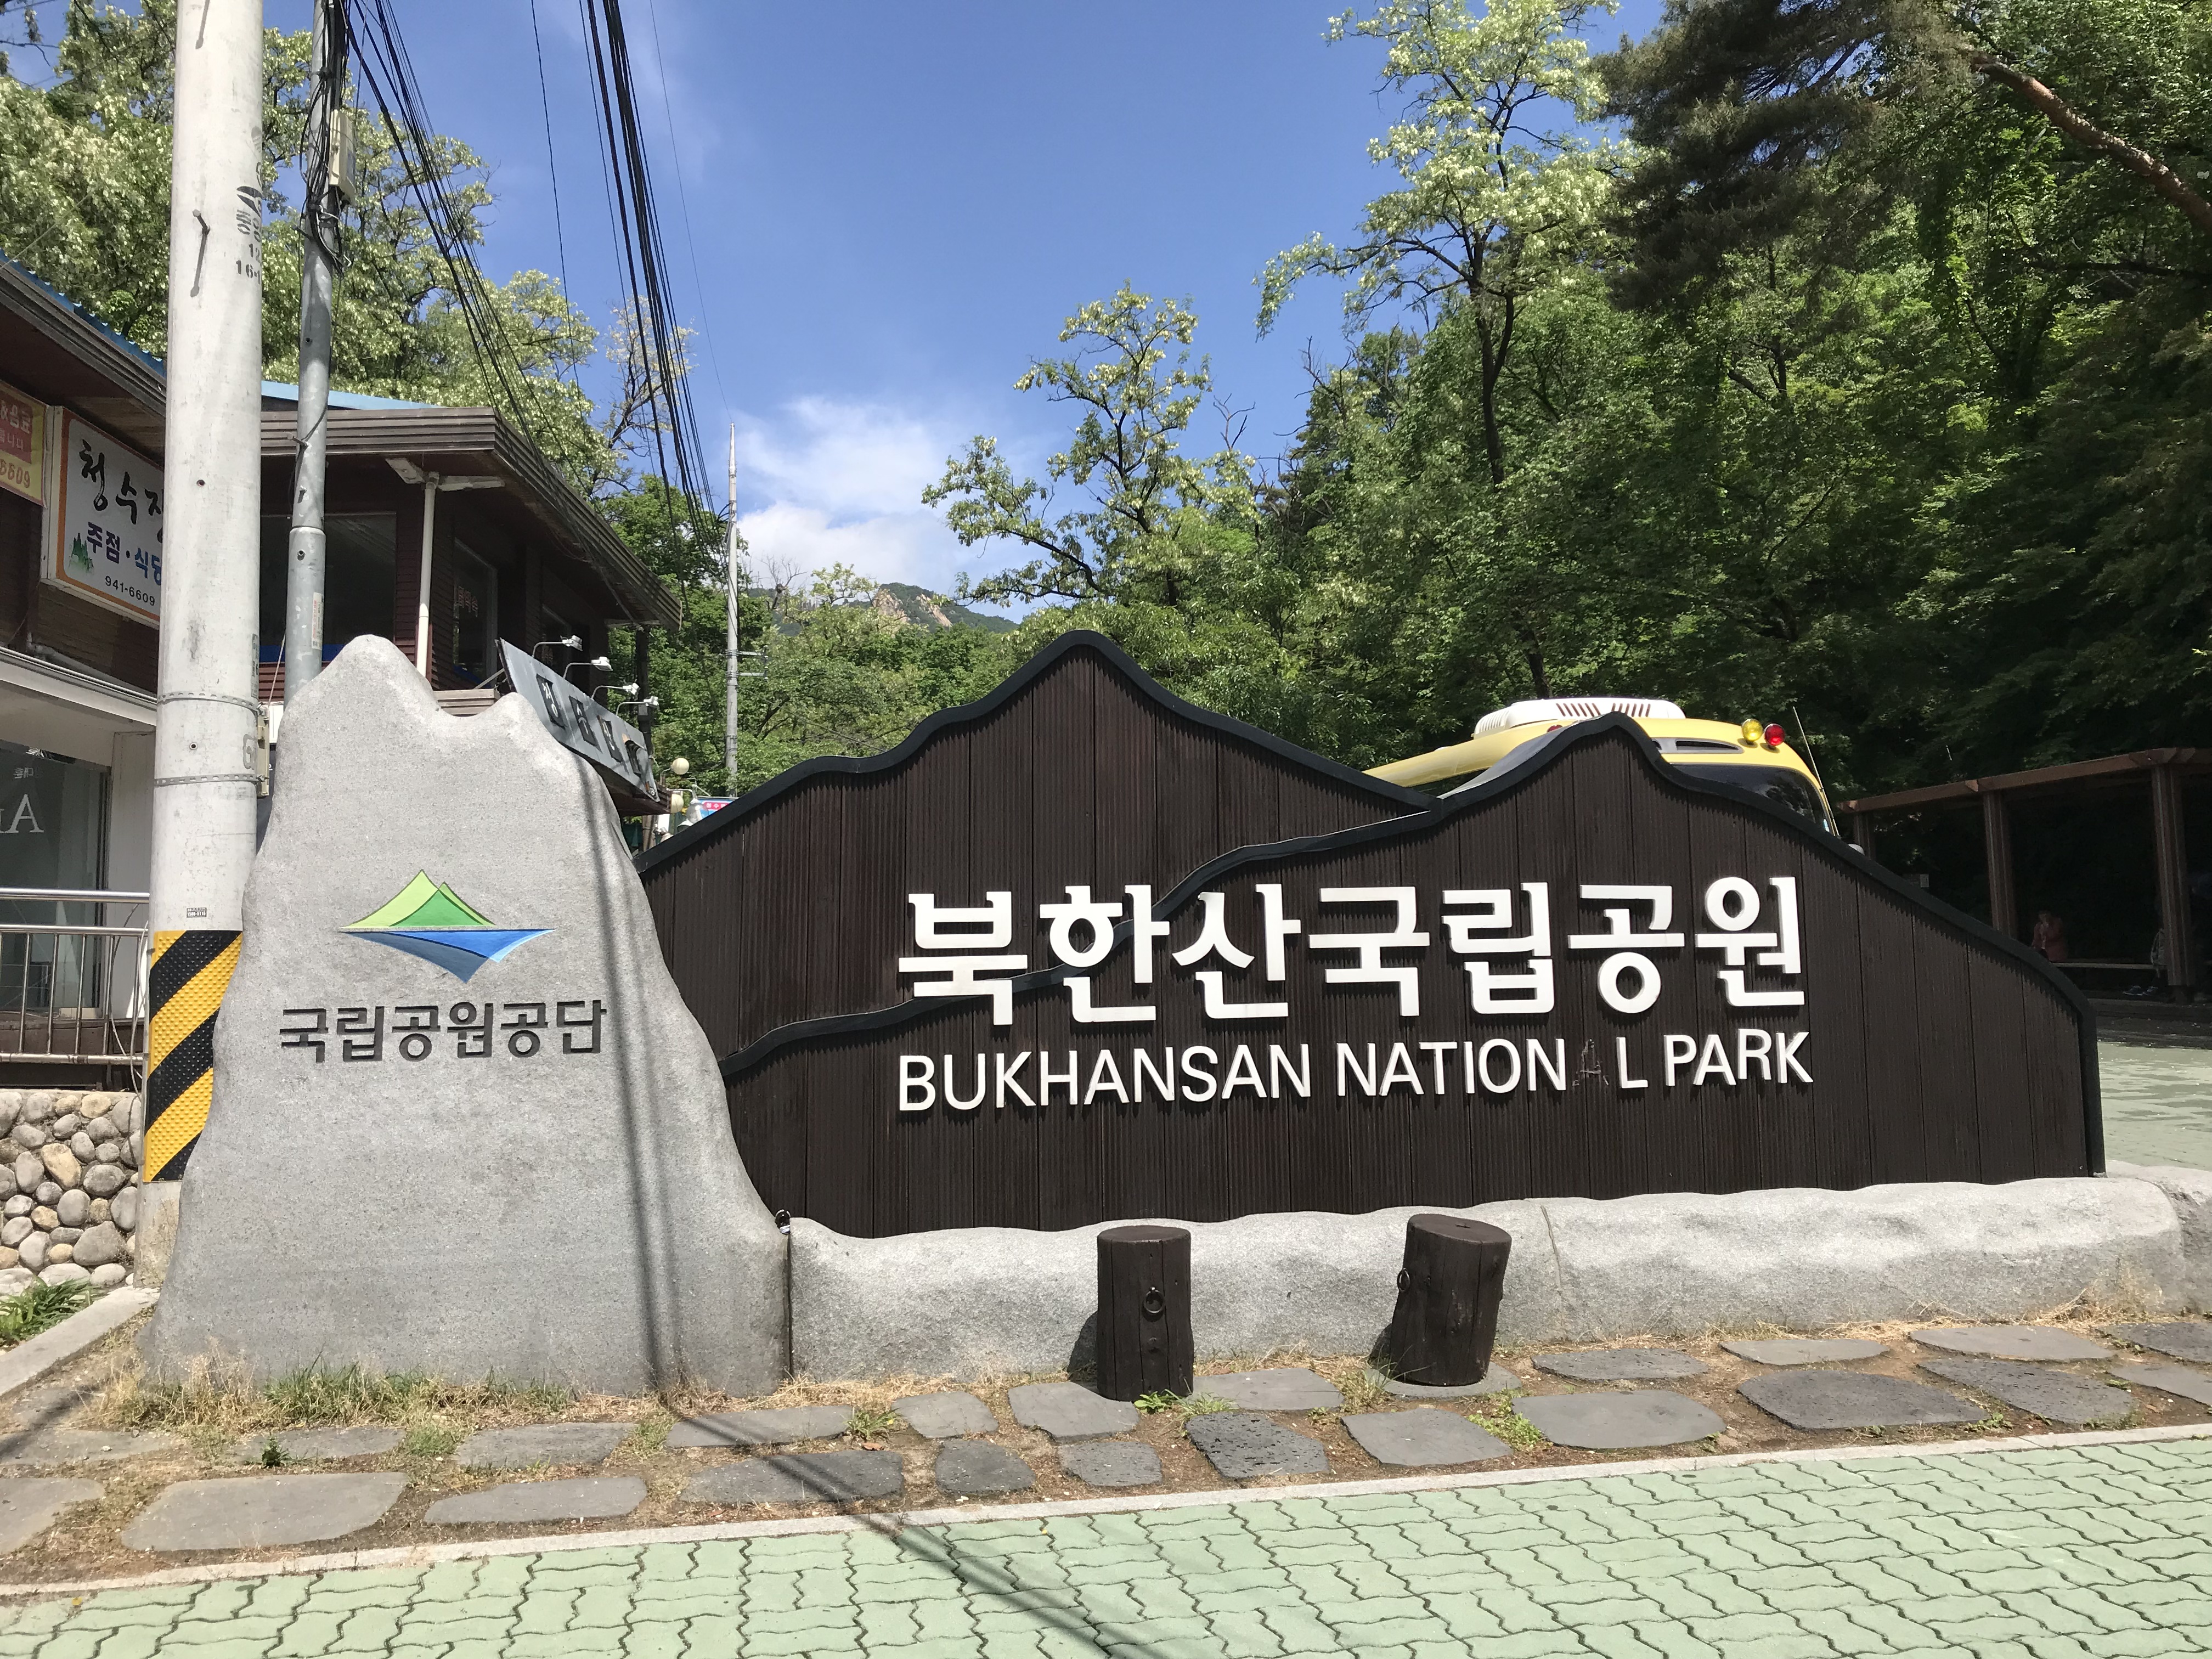 Hiking Bukhansan: Our Experience & Lessons Learned